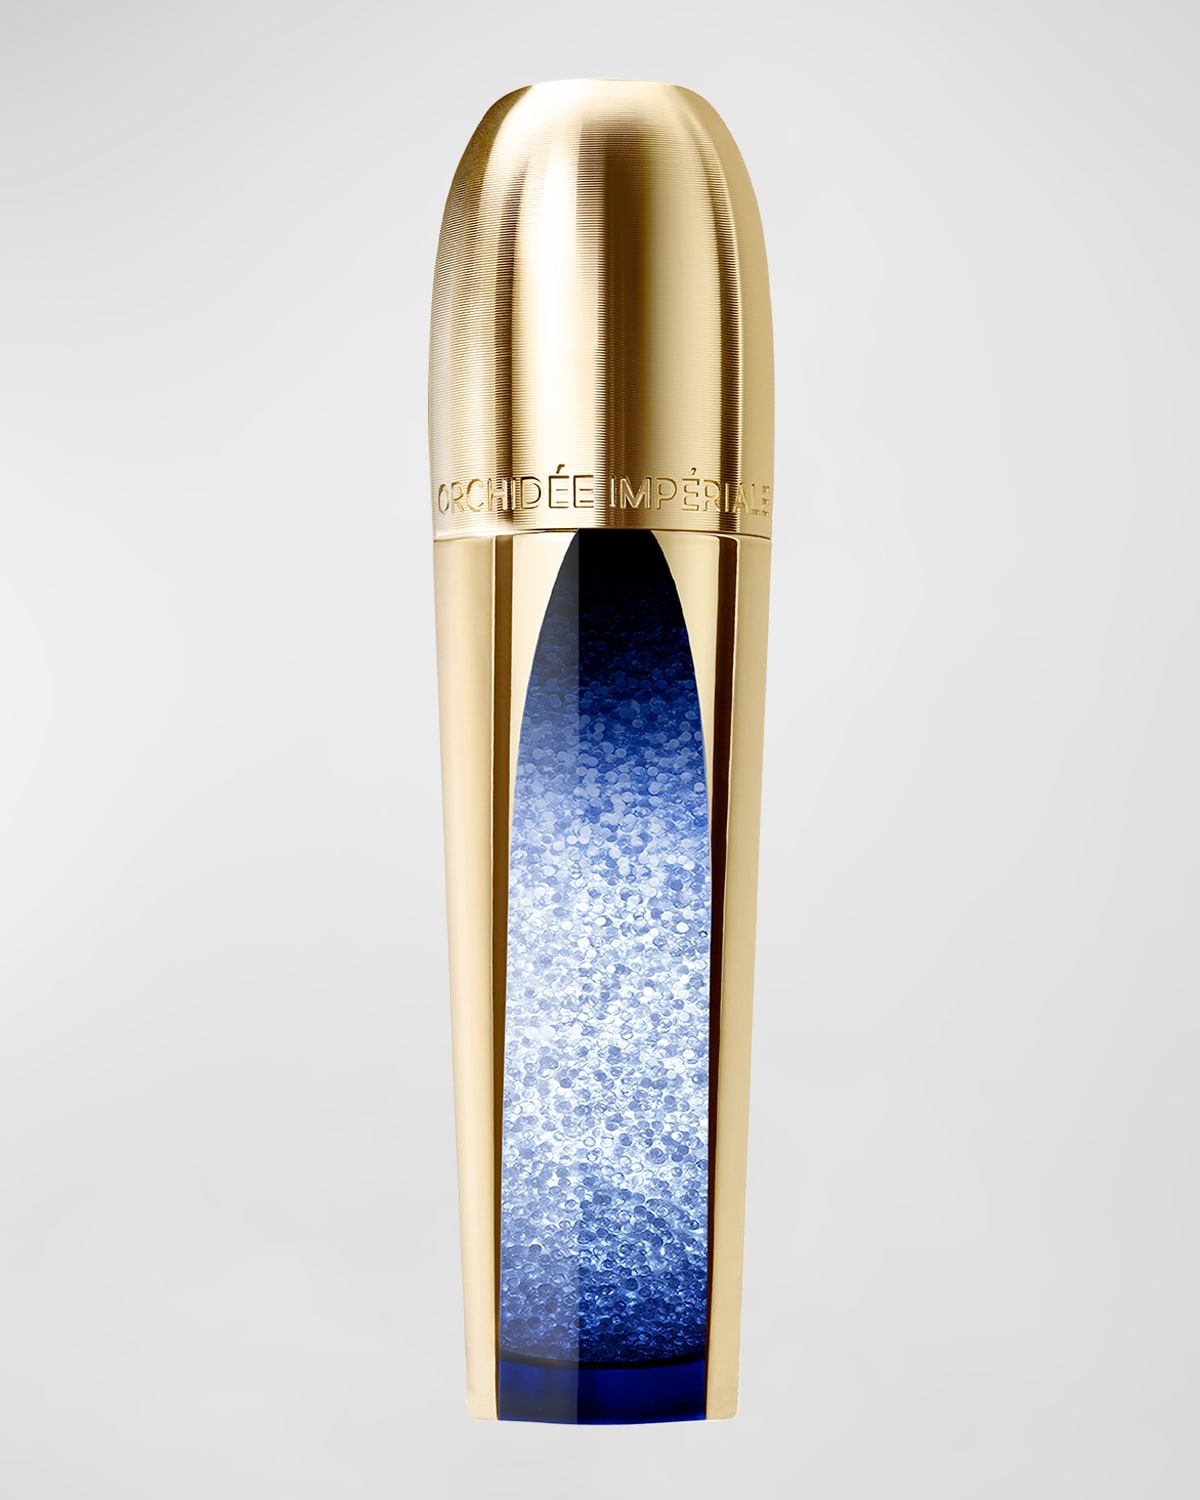 Orchidee Imperiale Micro-Lift Concentrate Serum, 1.7 oz.